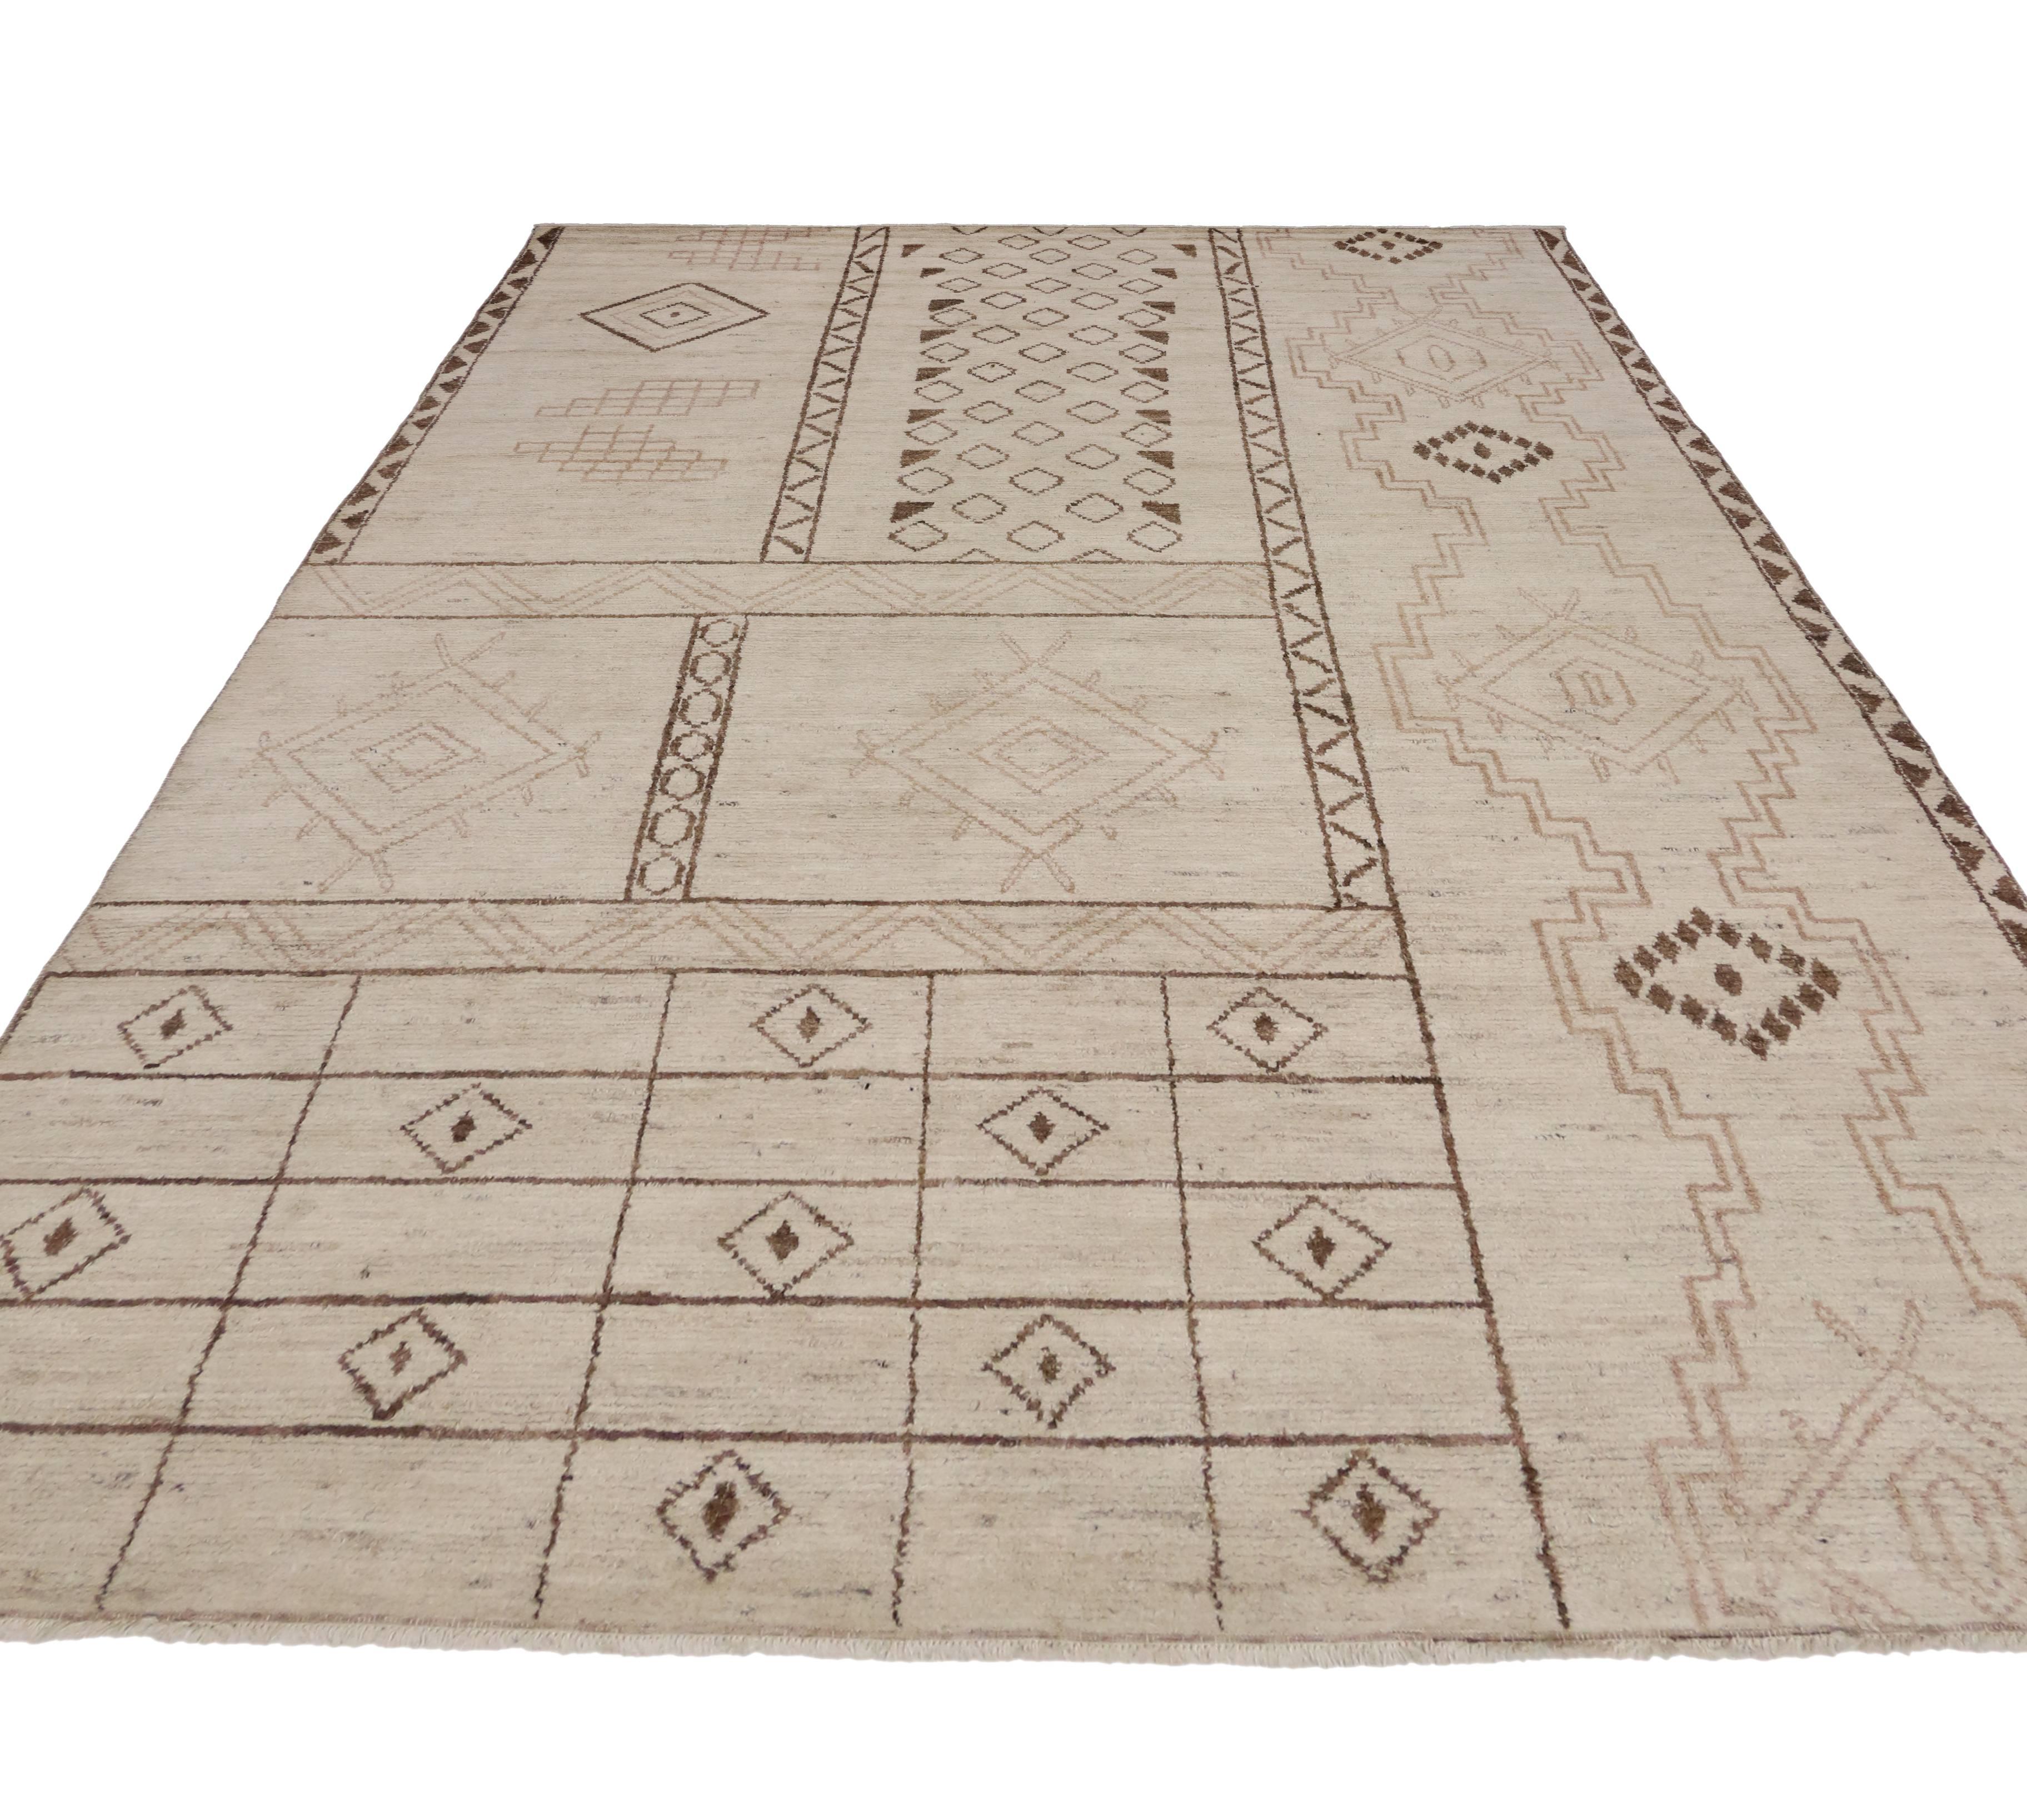 Pakistani Contemporary Moroccan Area Rug with Tribal Design